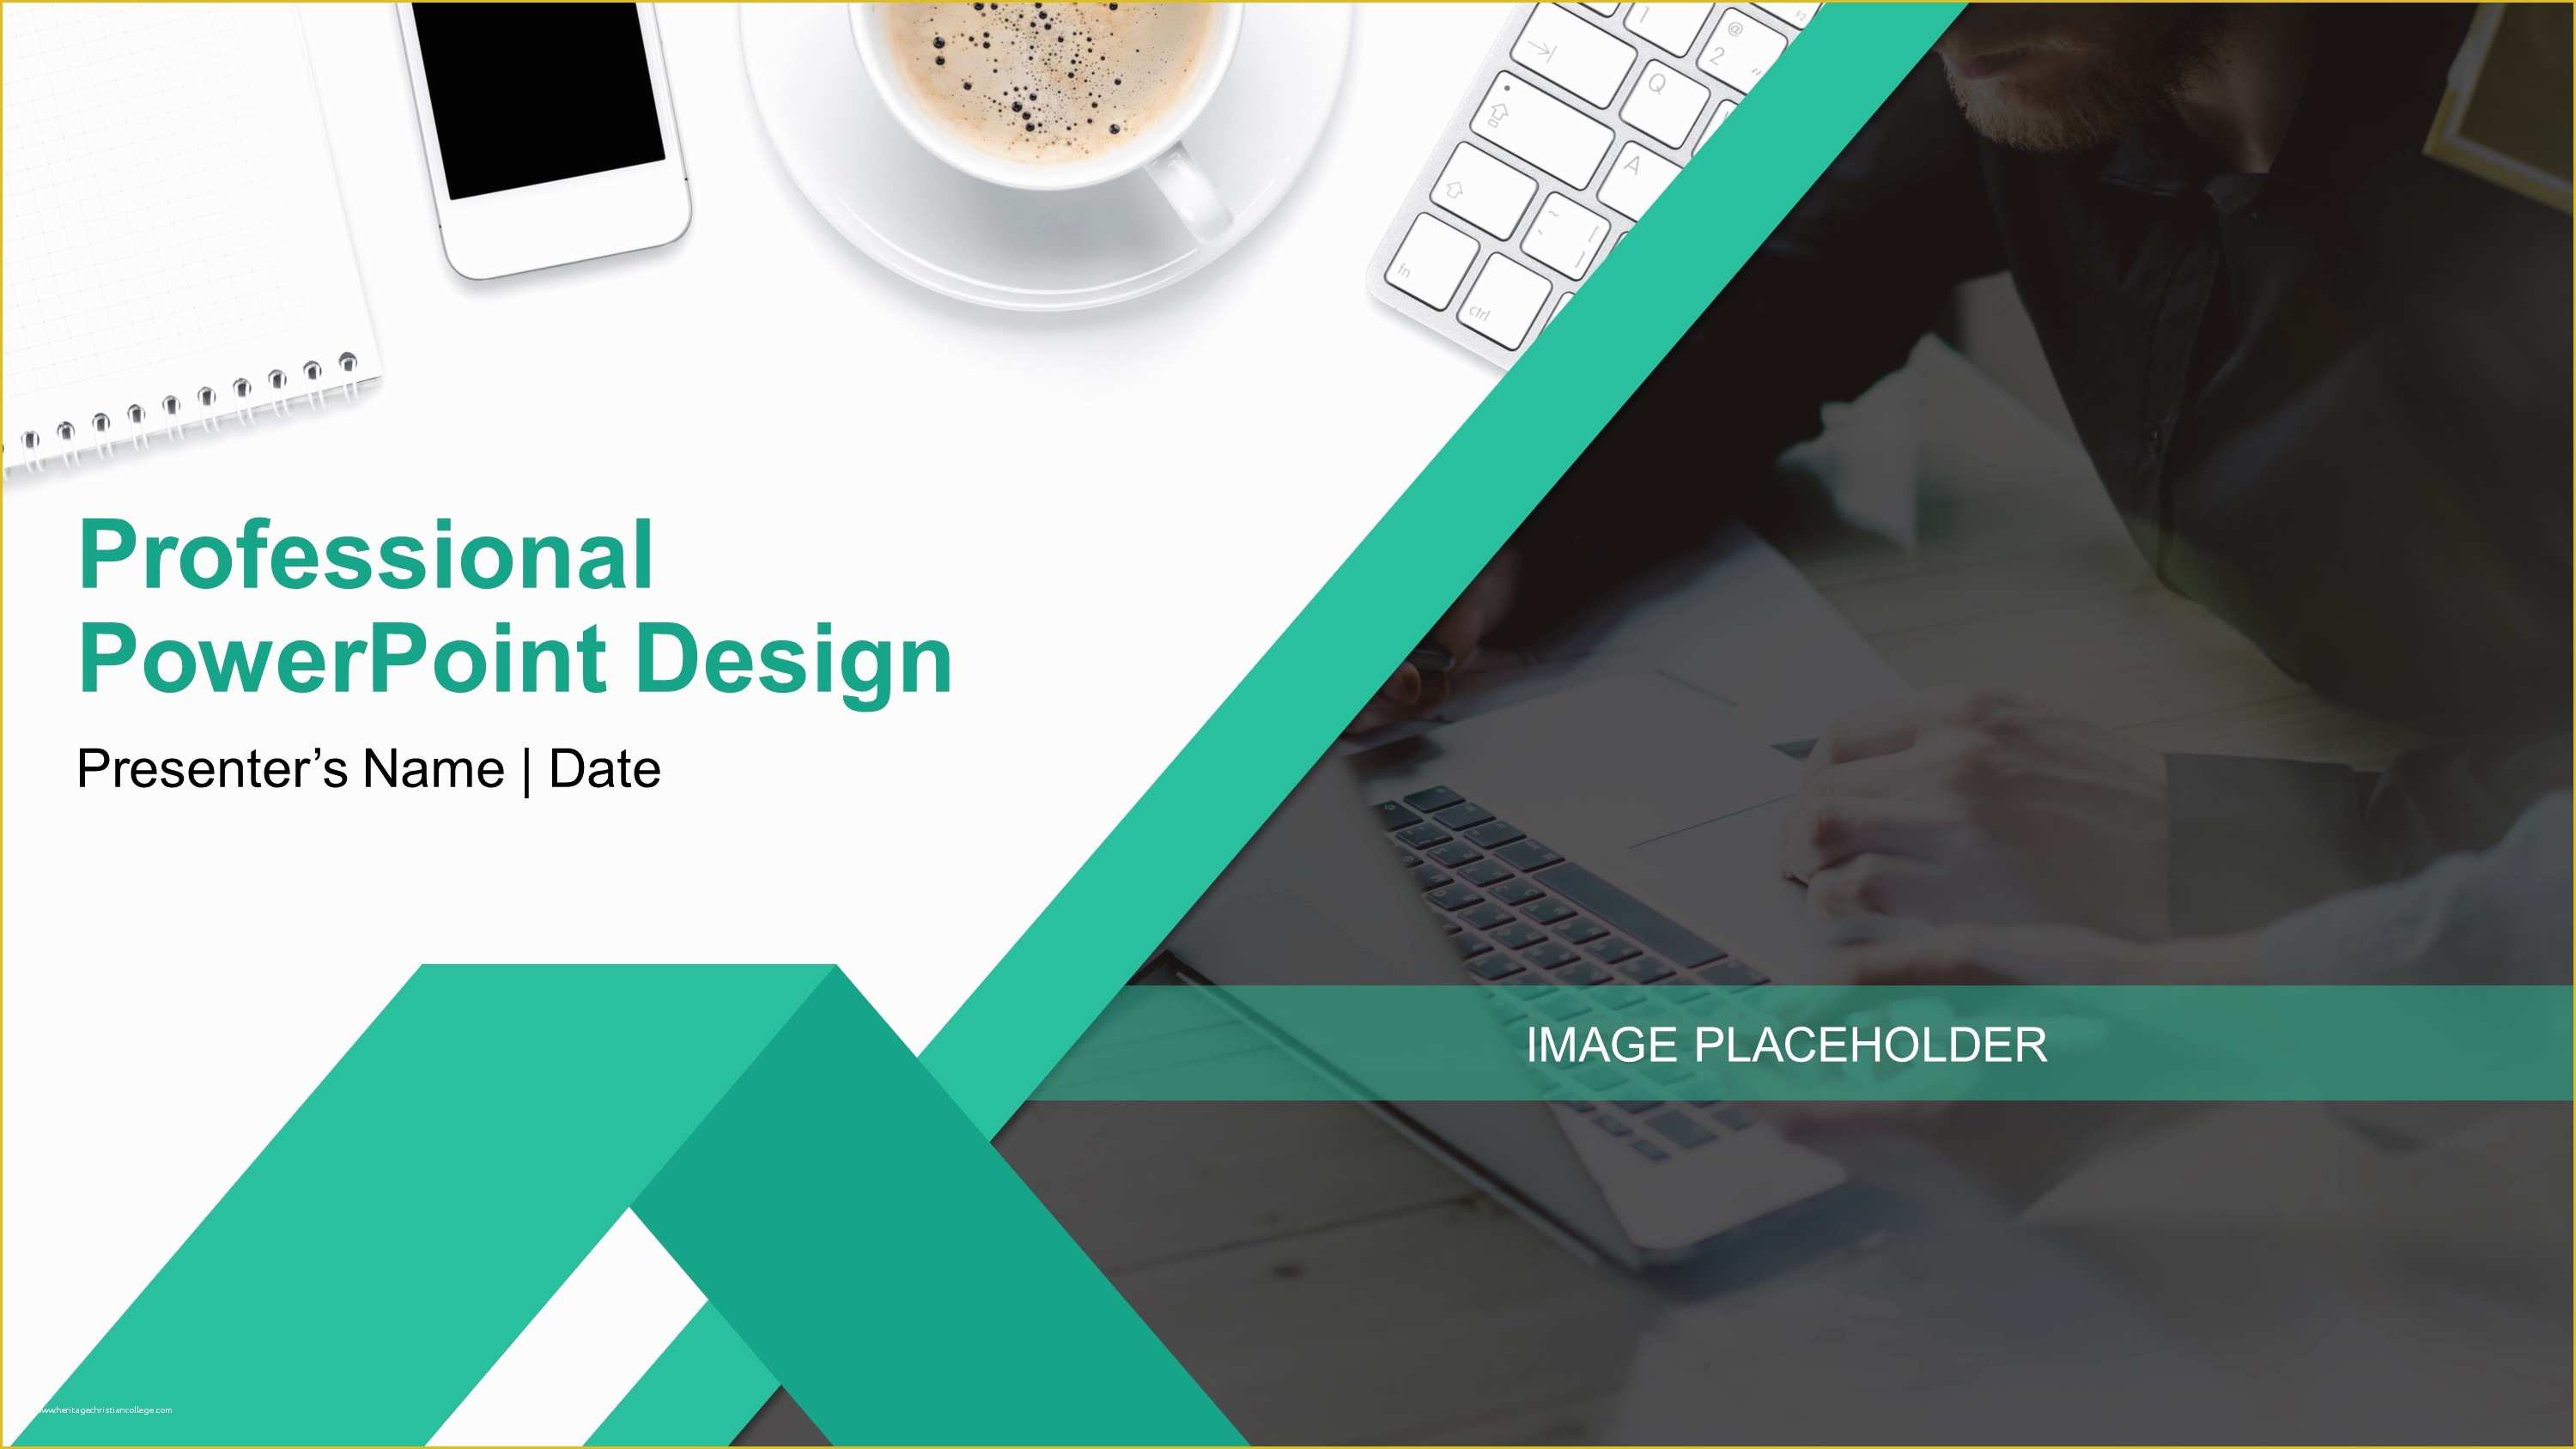 ppt templates project presentation free download